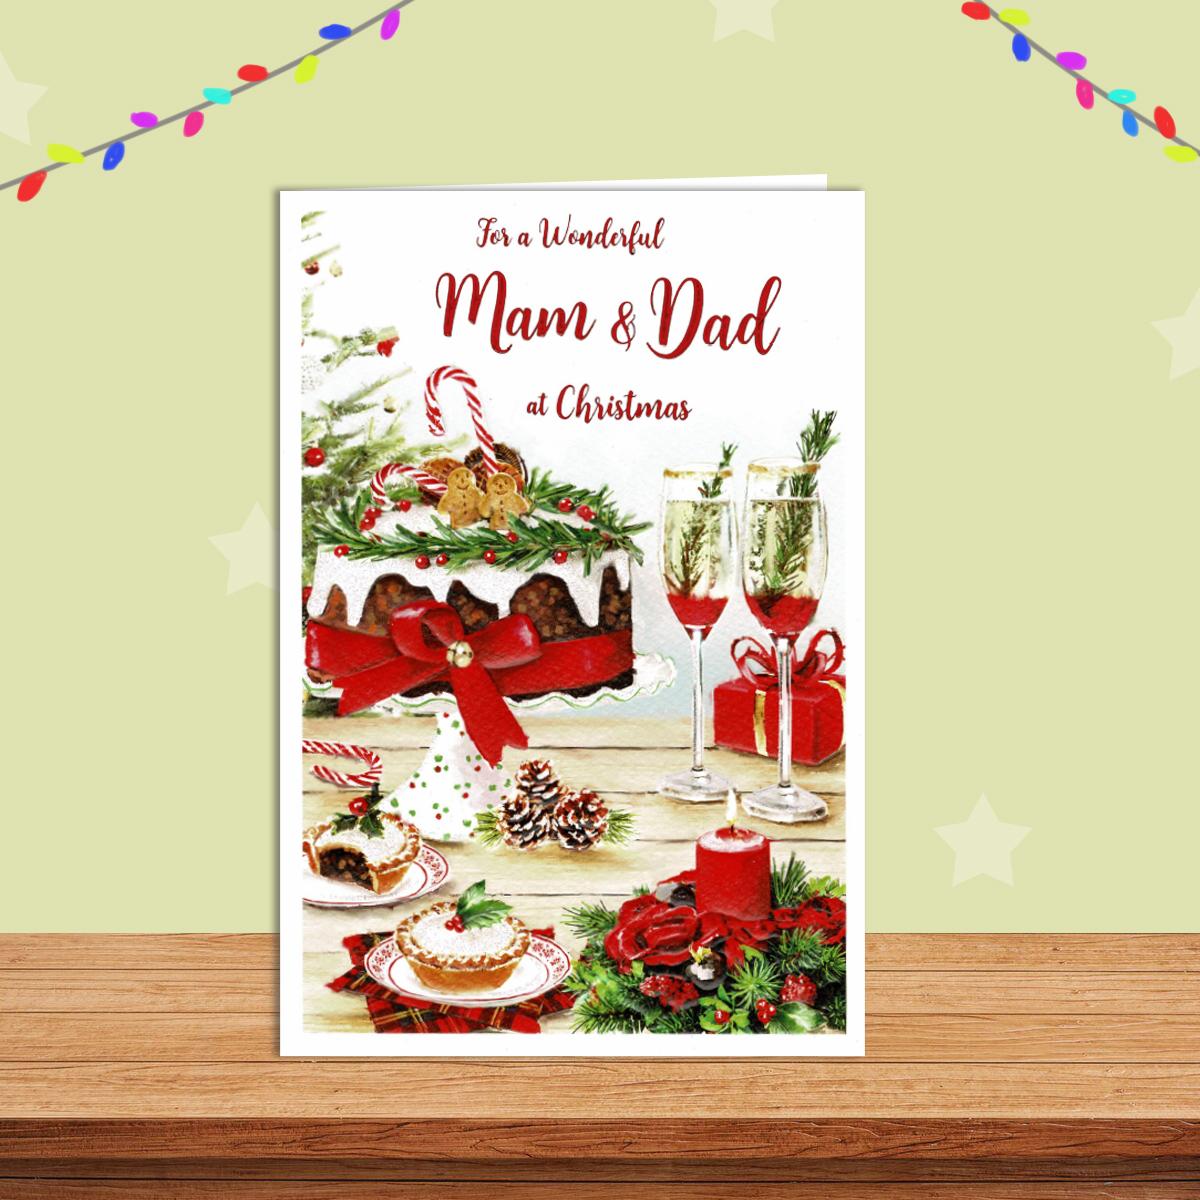 Mam And Dad Christmas Card Alongside Its Red Envelope